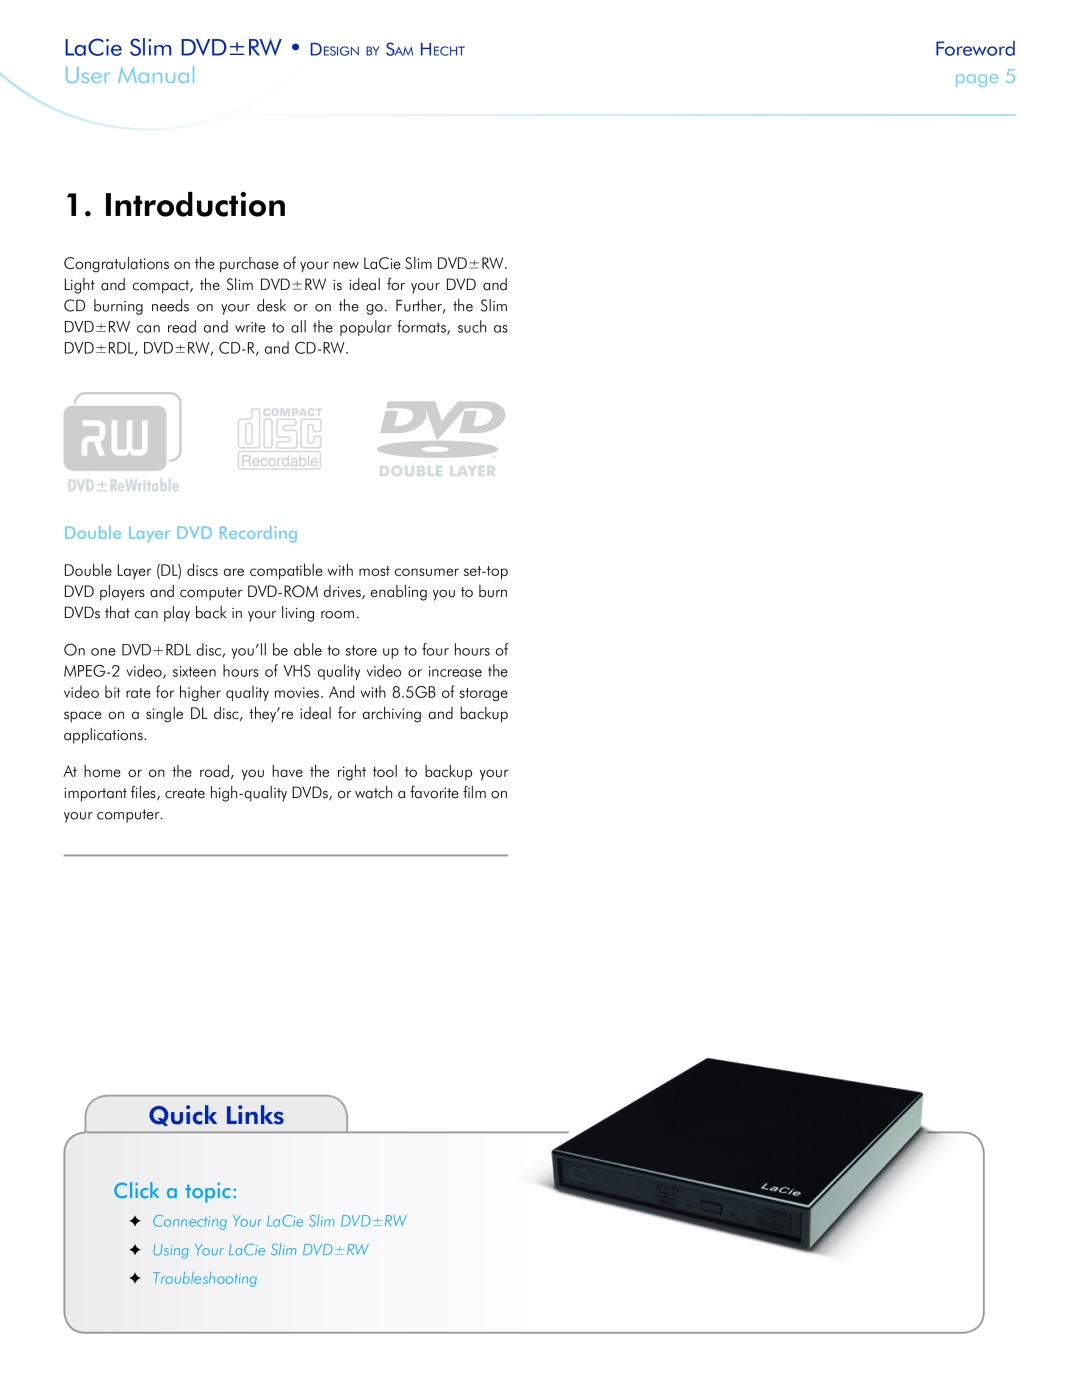 LaCie 301910 Introduction, Quick Links, Click a topic, Double Layer DVD Recording, Troubleshooting, User Manual, Foreword 